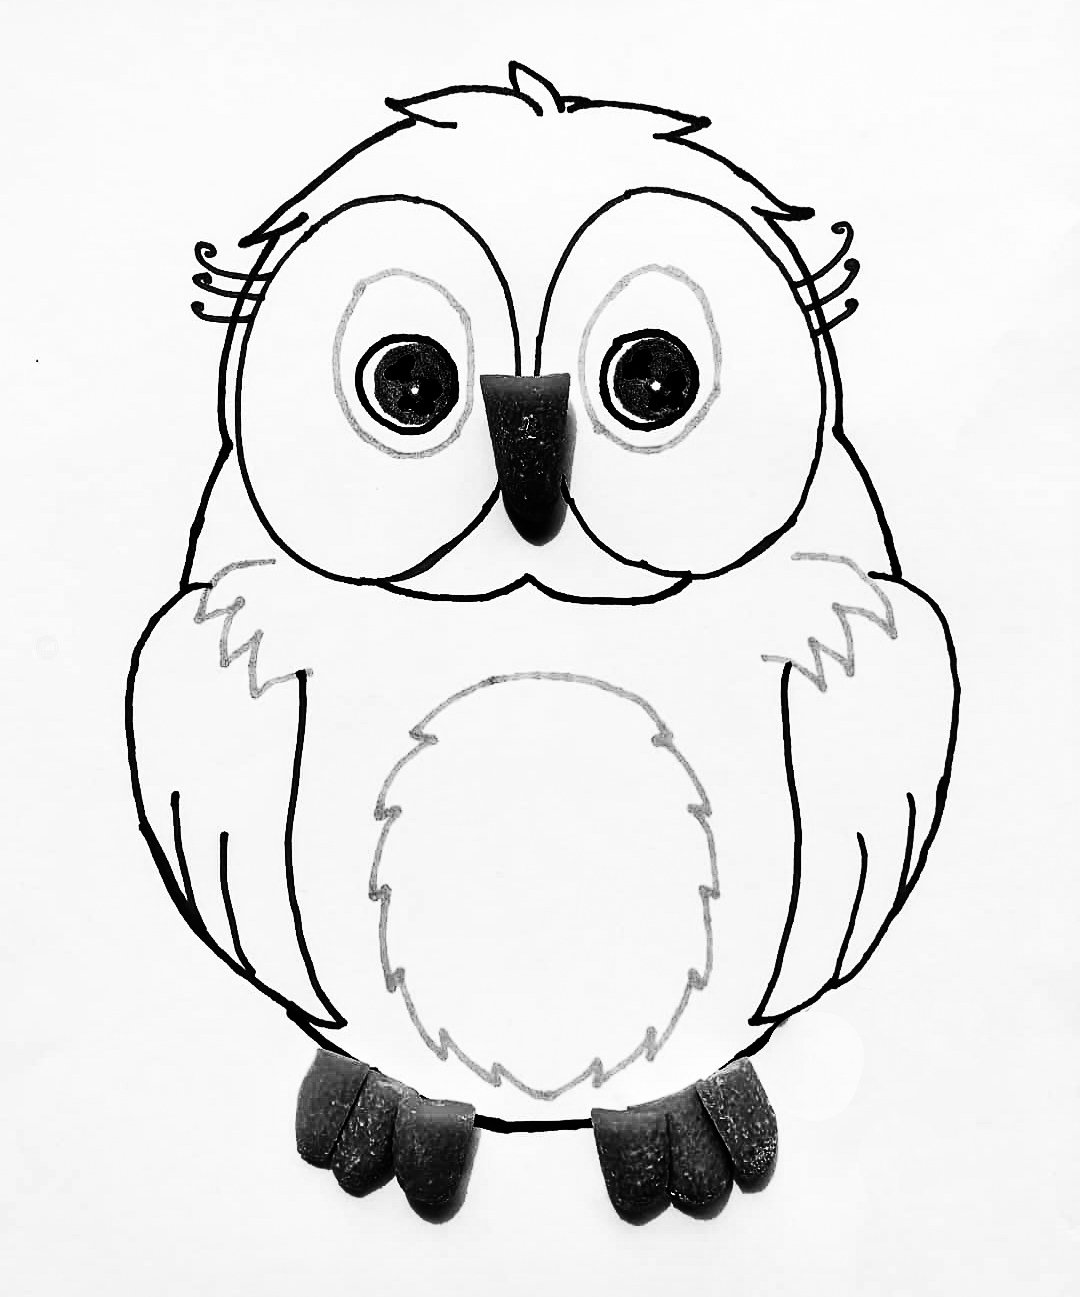 How to Draw an Owl for Kids - Step 10 | Owl kids, Owls drawing, Drawing for  kids